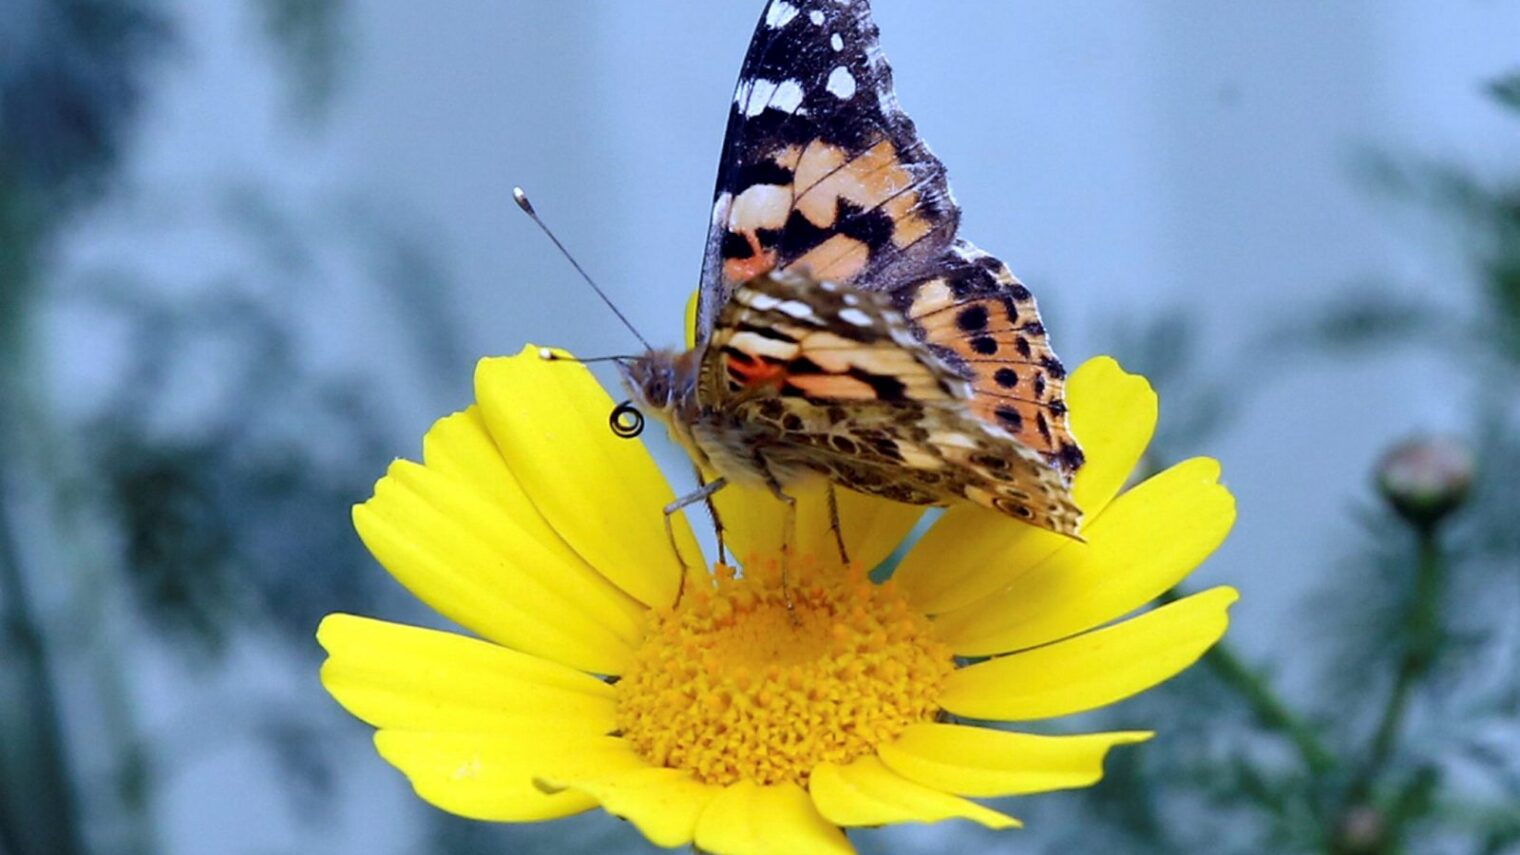 A painted lady butterfly sits on a flower in the Jezreel Valley in Israel, March 23 2019. Photo by Yossi Zamir/Flash90